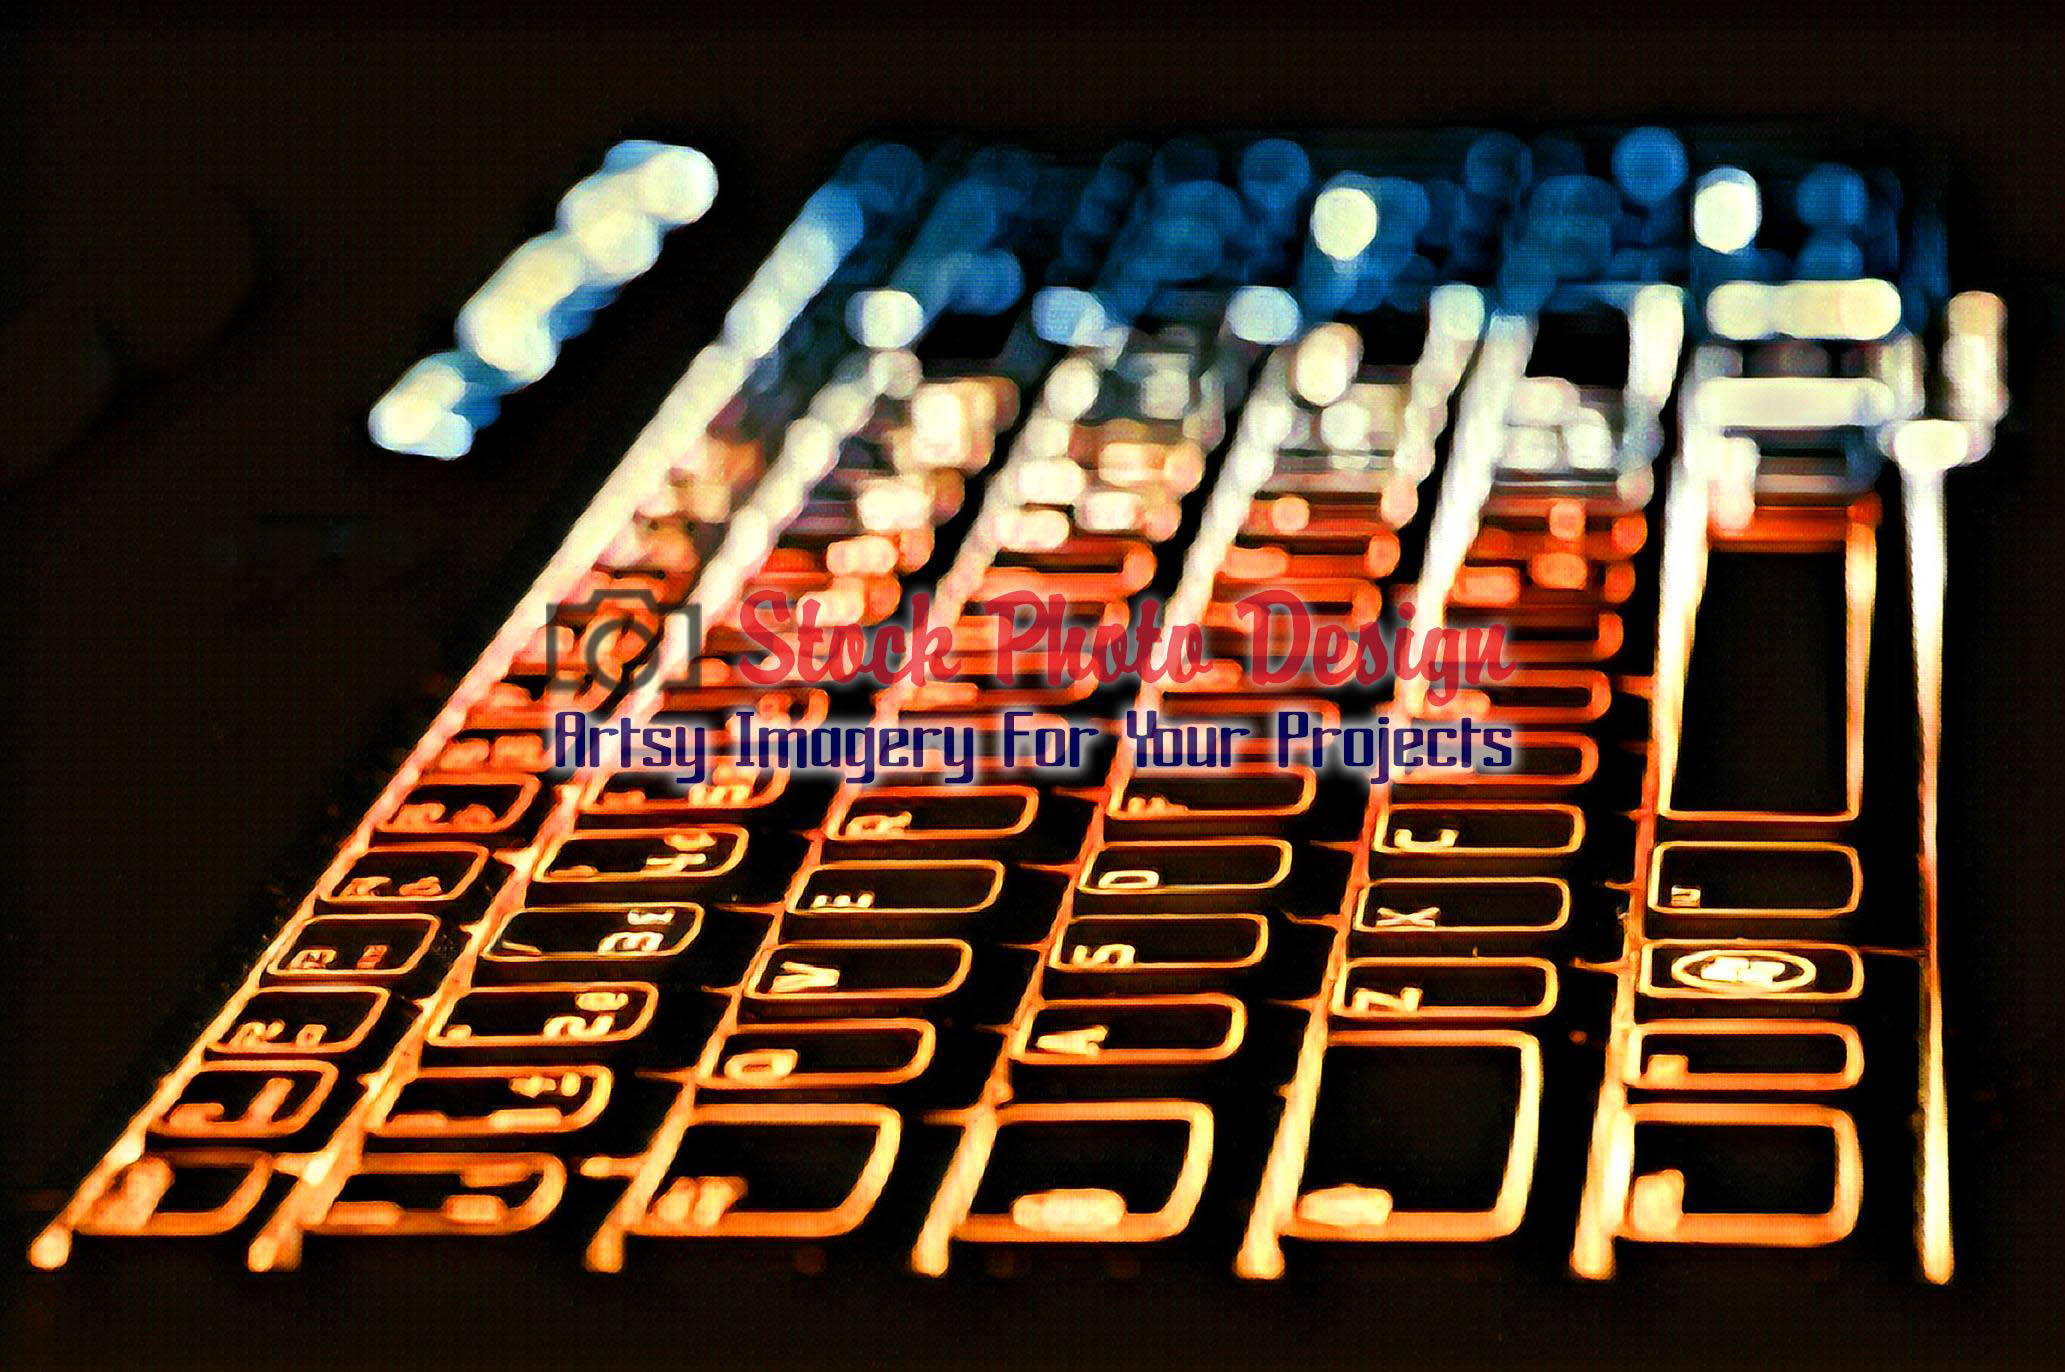 Colorful Illuminated Keyboard 13 - Dimensions: 2065 by 1372 pixels